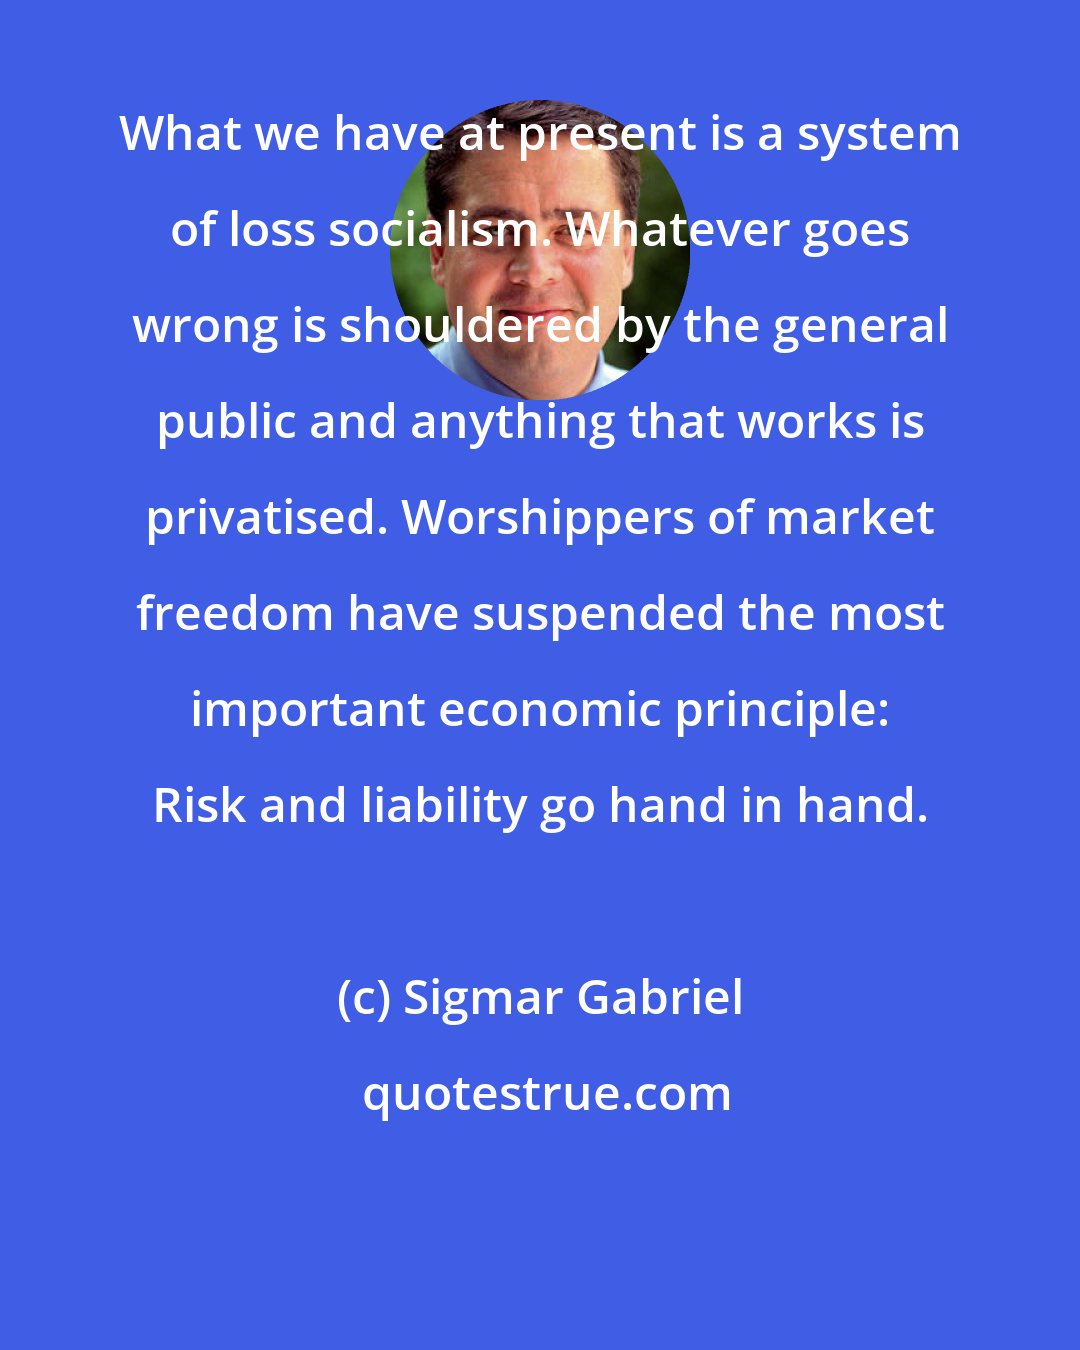 Sigmar Gabriel: What we have at present is a system of loss socialism. Whatever goes wrong is shouldered by the general public and anything that works is privatised. Worshippers of market freedom have suspended the most important economic principle: Risk and liability go hand in hand.